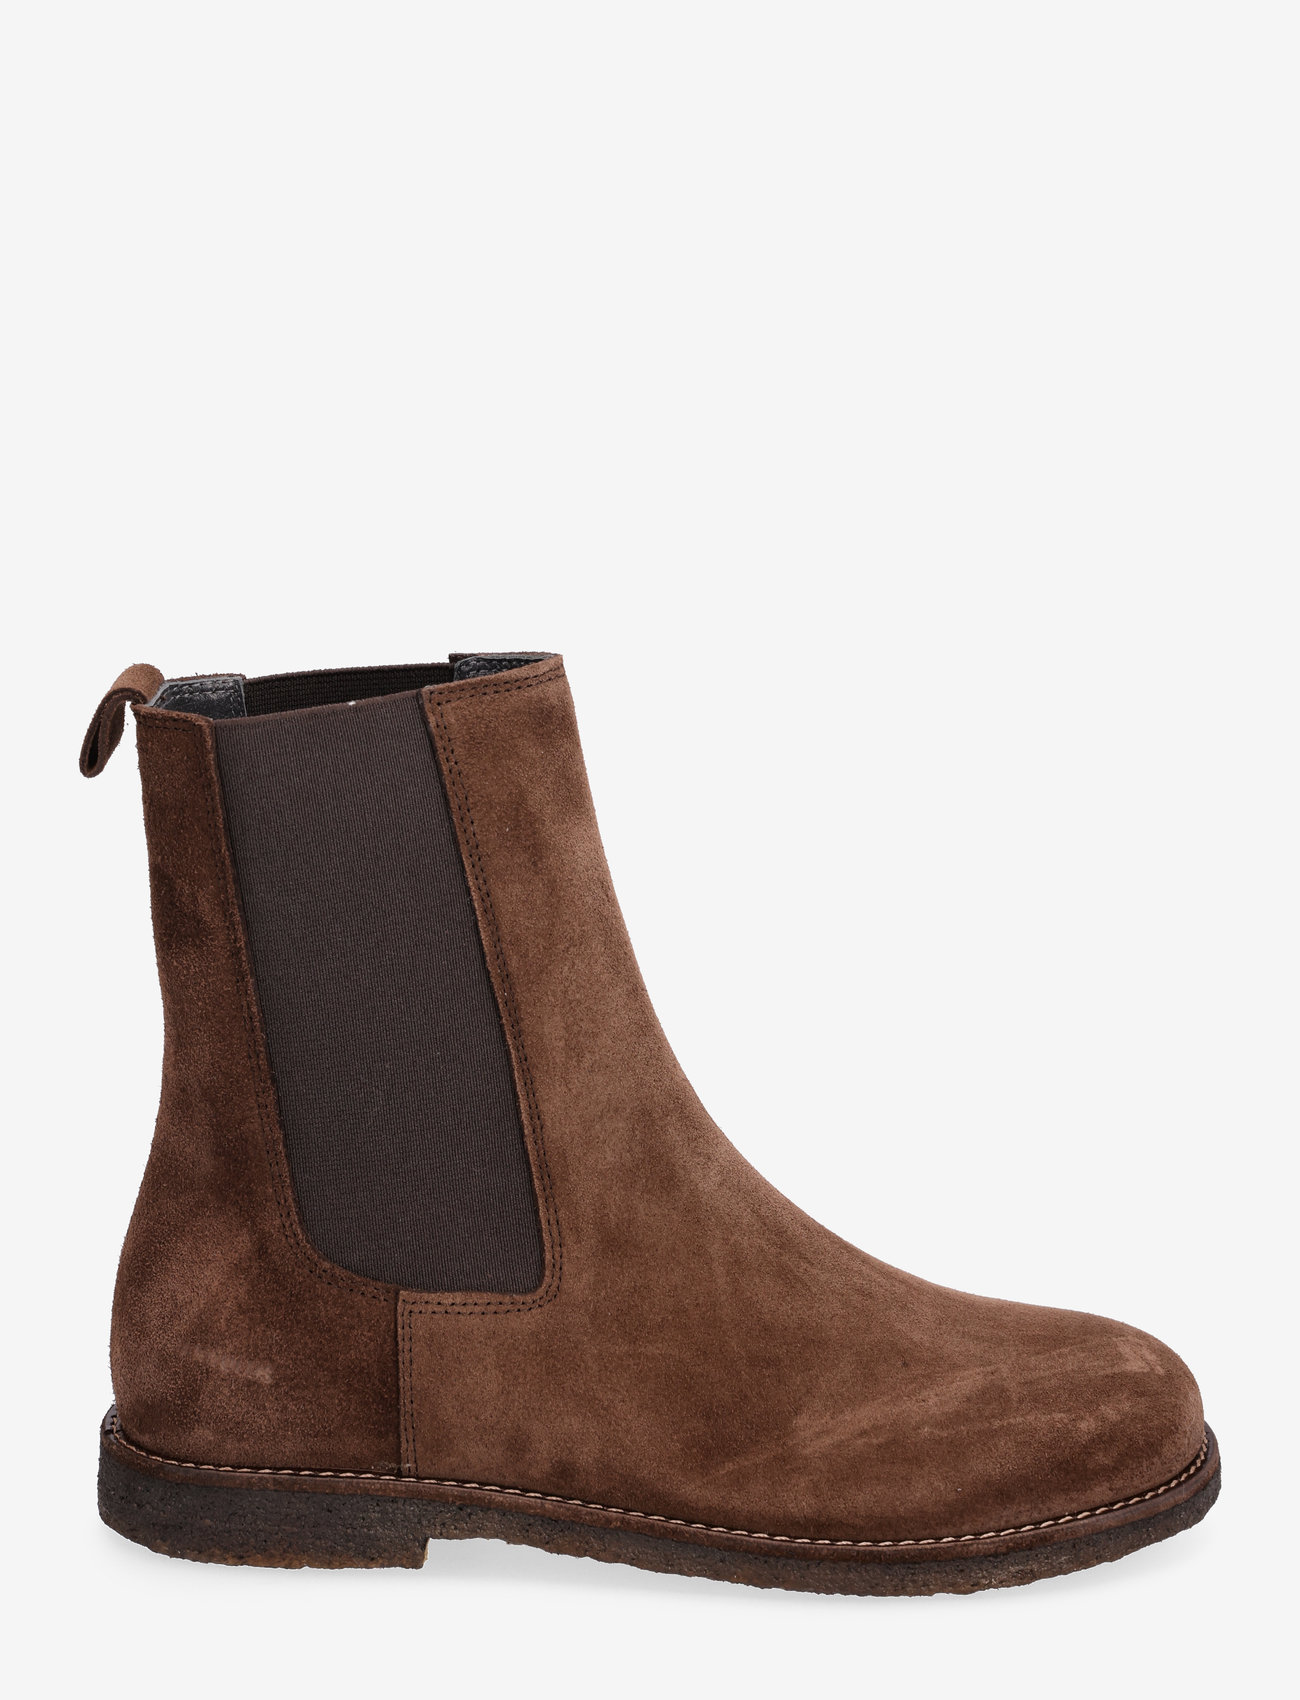 ANGULUS - Boots - flat - chelsea boots - 1718/002 brown/brown - 1